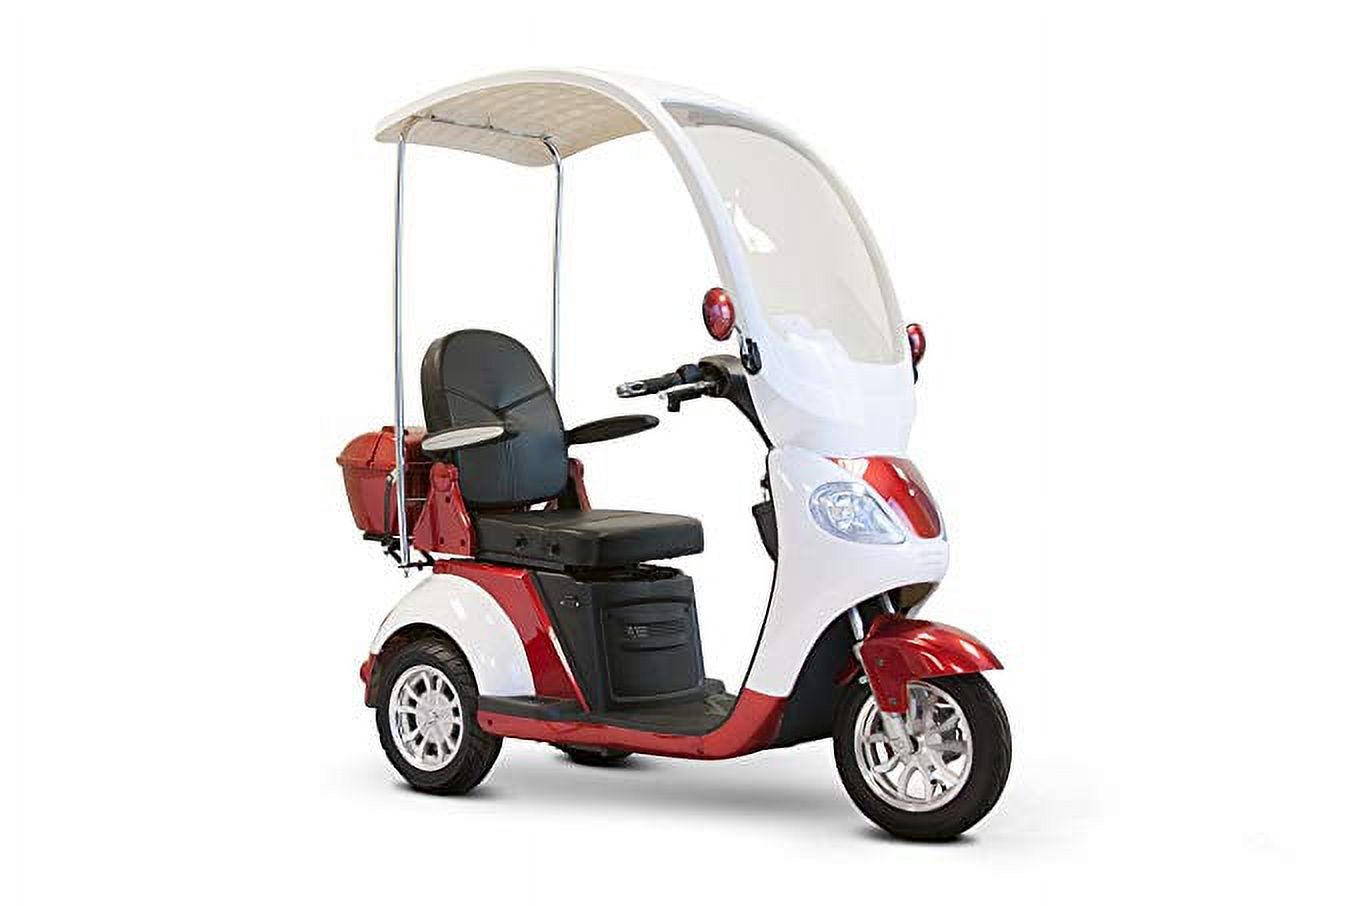 Ewheels Ewheels Luxurious Electric Oversized Scooter with Full Canopy Red - image 1 of 3